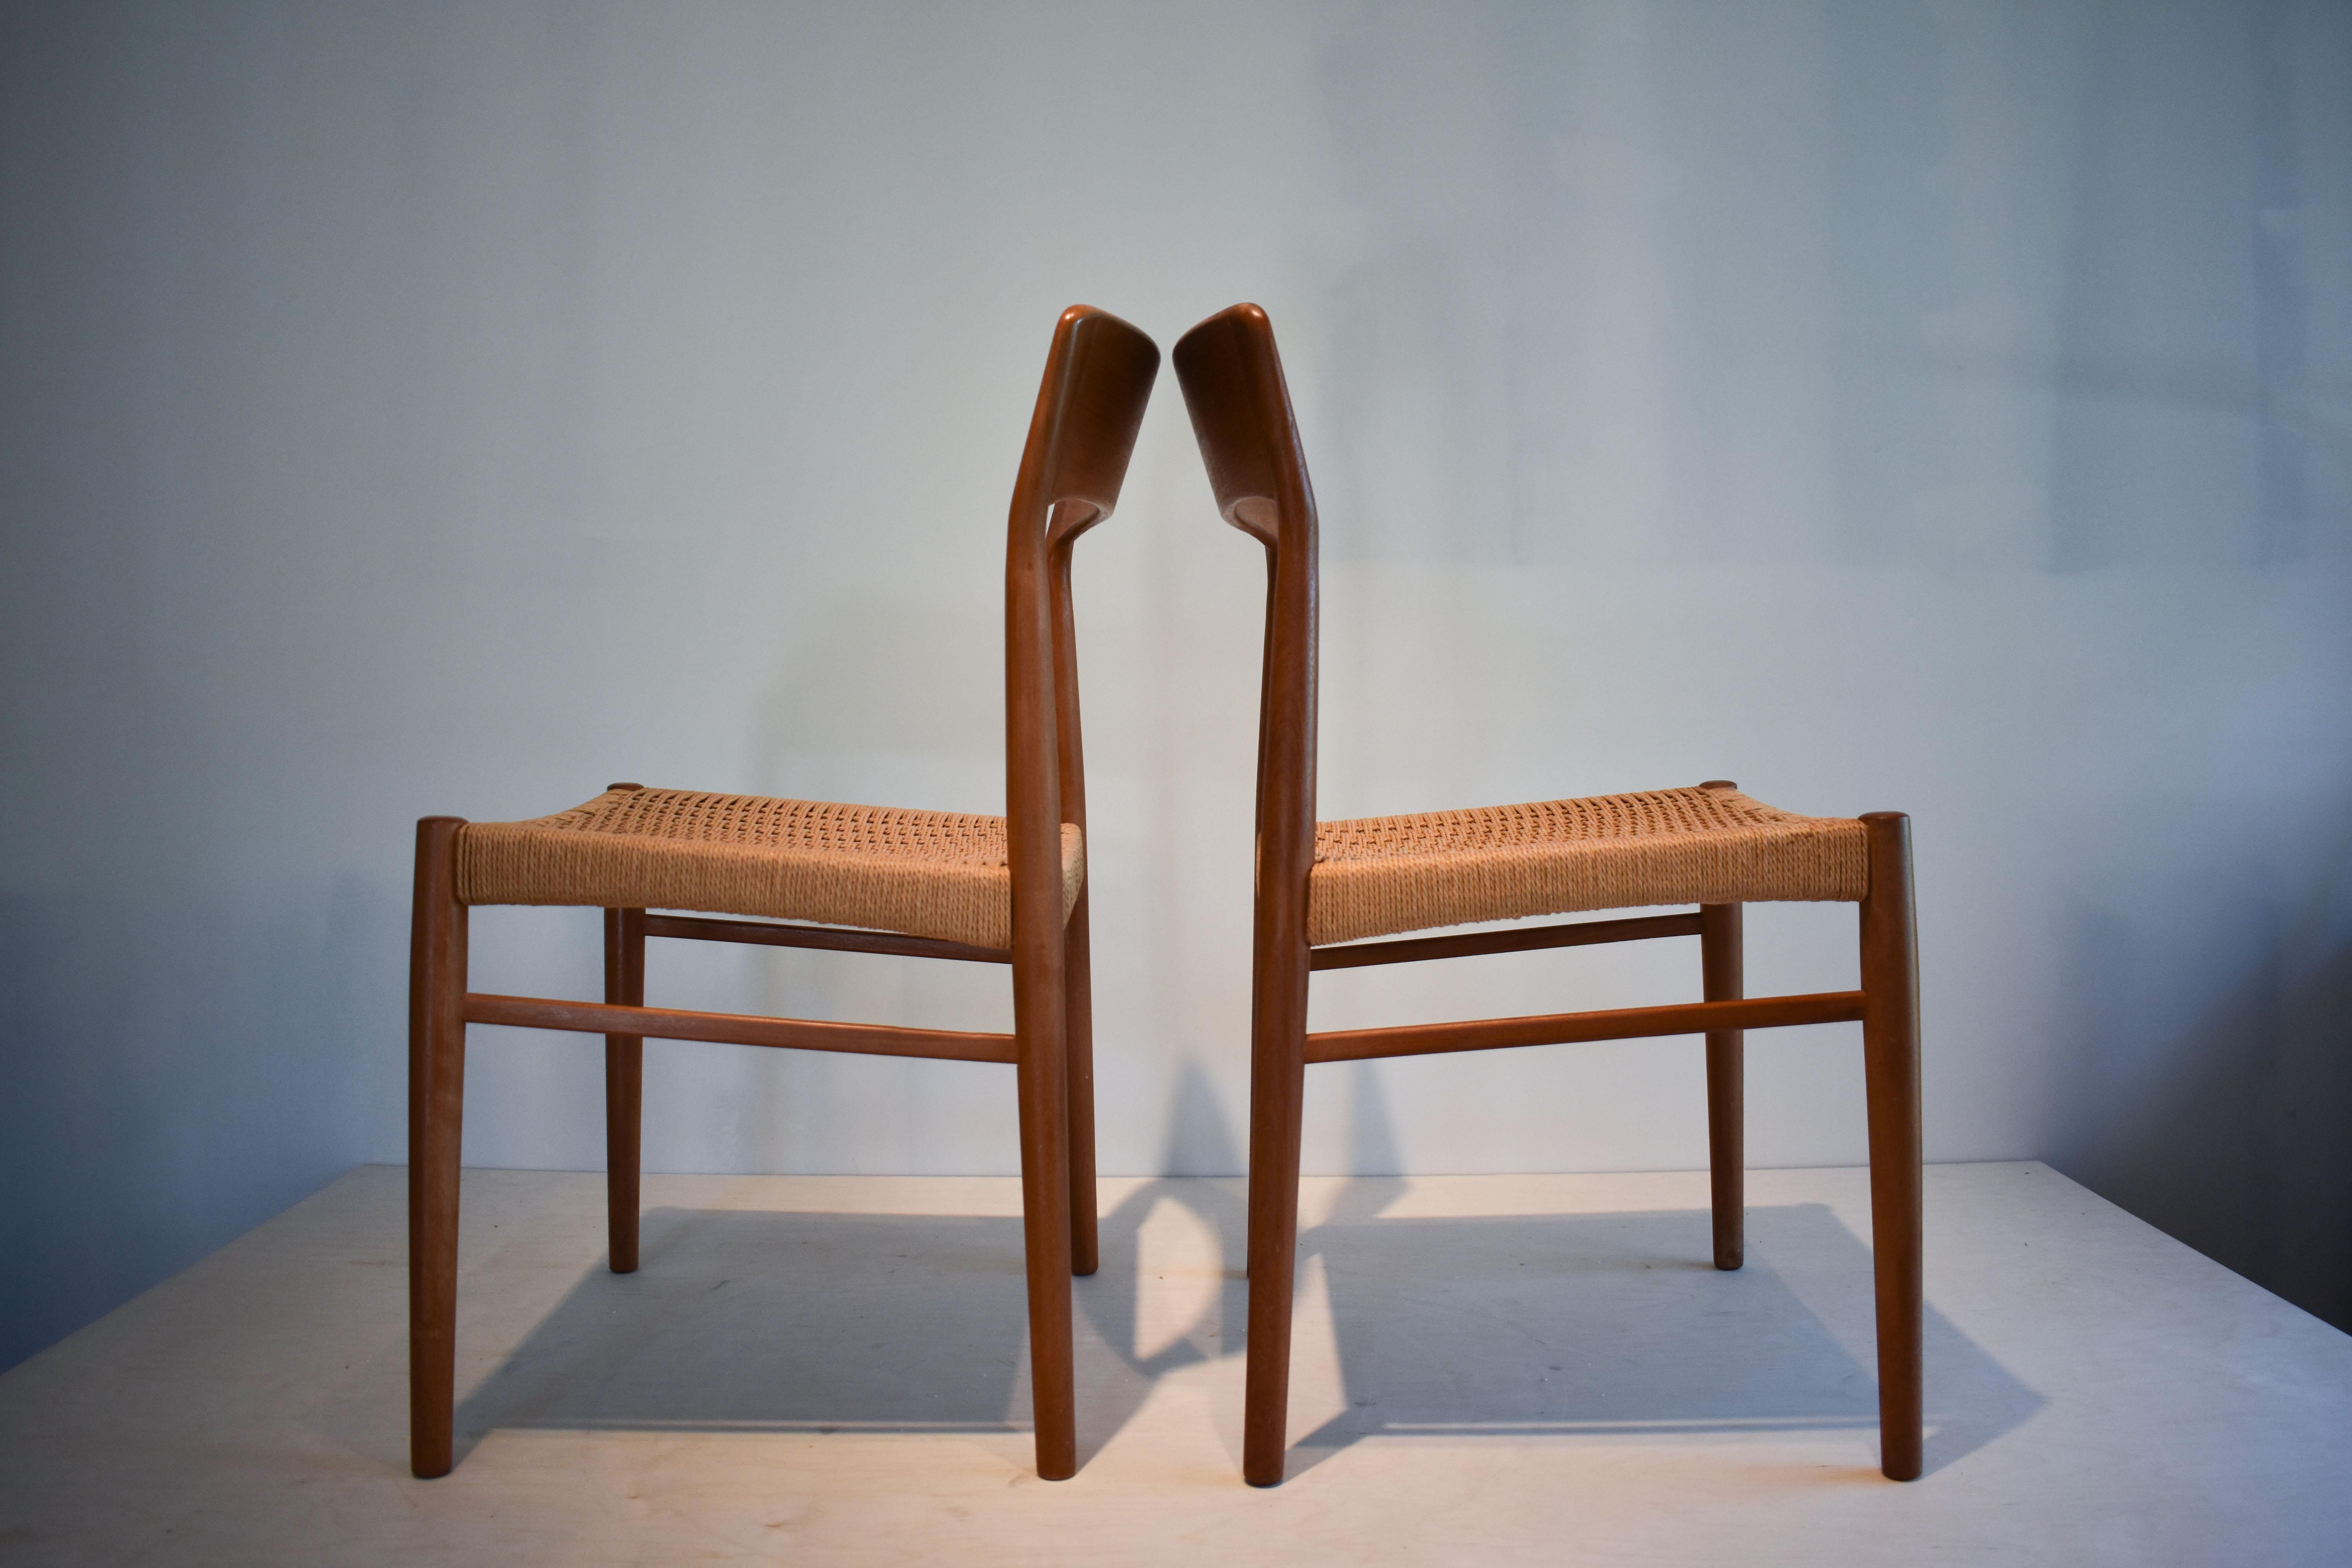 Beautiful midcentury teak and sisal seat chairs. These were commissioned by Karen Margreta Imports of Corona del Mar California in the 1960s, designed by Niels O Moller as his model 75 chair. They are in fantastic, vintage condition with just some